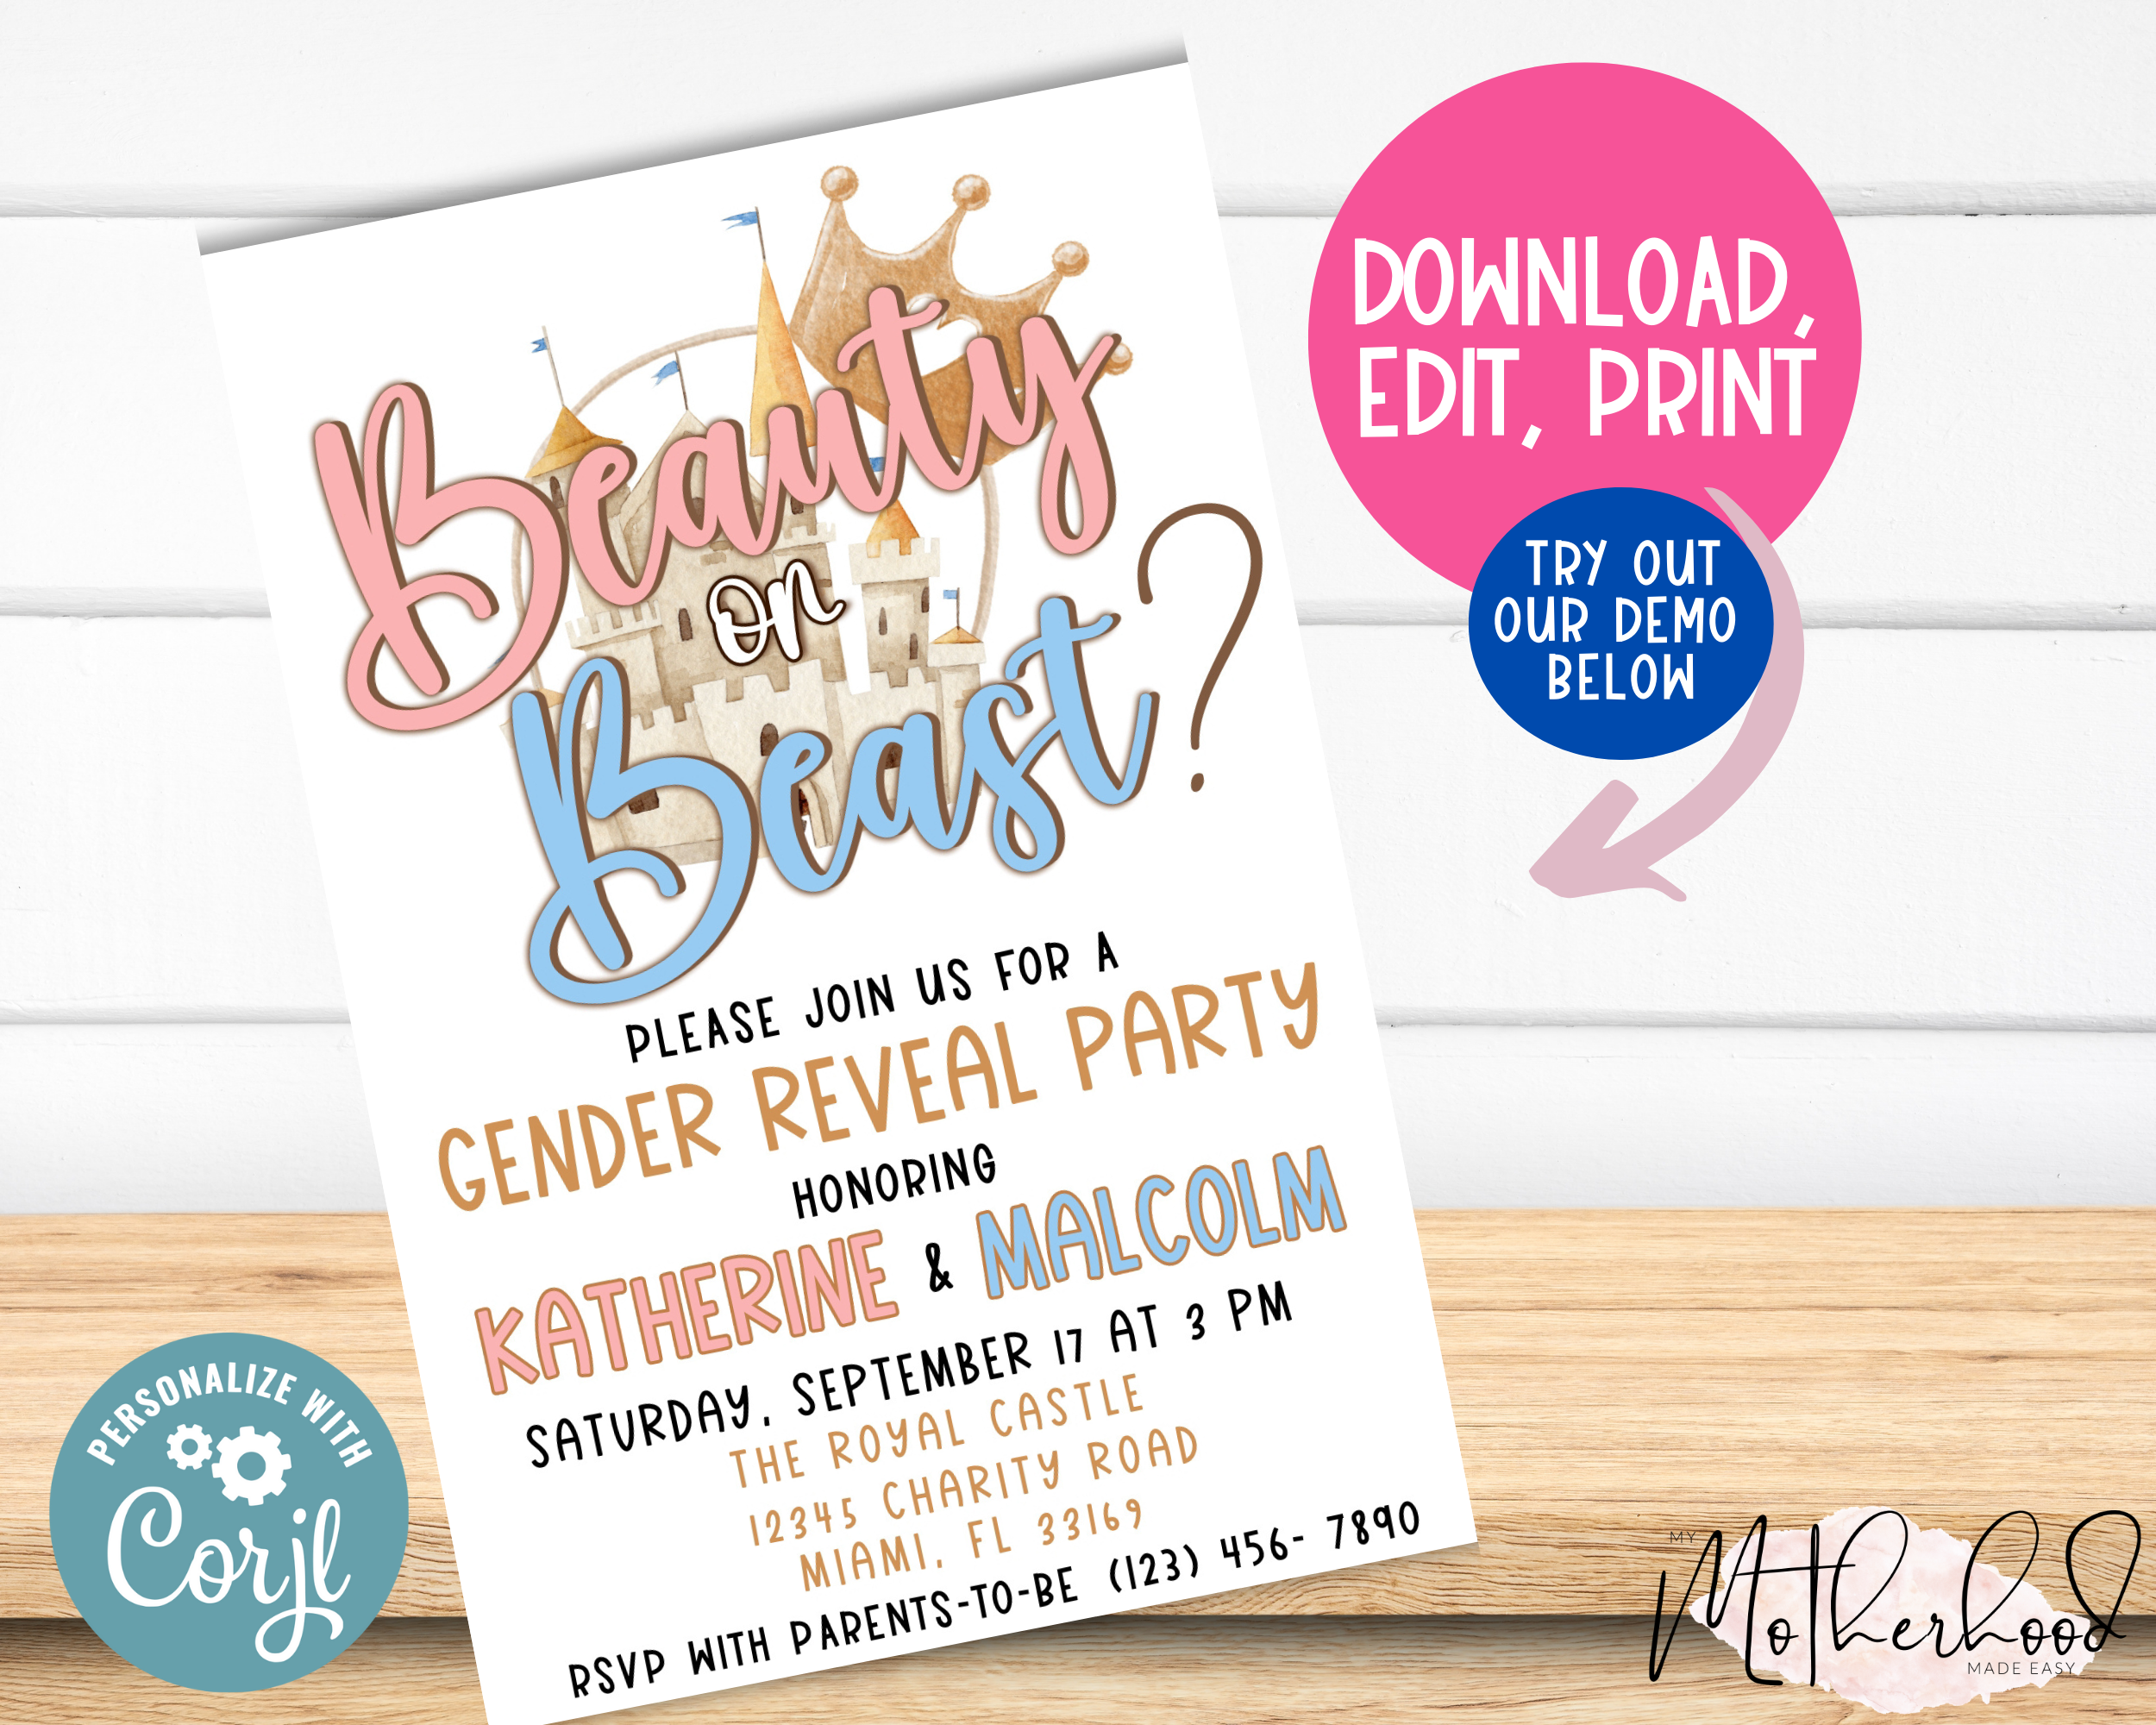 Beauty or Beast_ He or She_ Gender Reveal Party Invitation - Pink and Blue- Castle - He or She- Boy or Girl - Royal Ball- Prince or Princess  Introducing the Editable Beauty or Beast Gender Reveal Party Invitation Card! This beautiful and personalizable Gender Reveal Party Invitation is the perfect way to invite your amazing friends and family to your gender reveal party. With a variety of colors and fonts to choose from, you can easily customize this party announcement to perfectly reflect your style. Whether you're sharing on social media or sending out physical party invitations, this stunning Gender Reveal Party Invitation is sure to get everyone excited for your baby reveal.